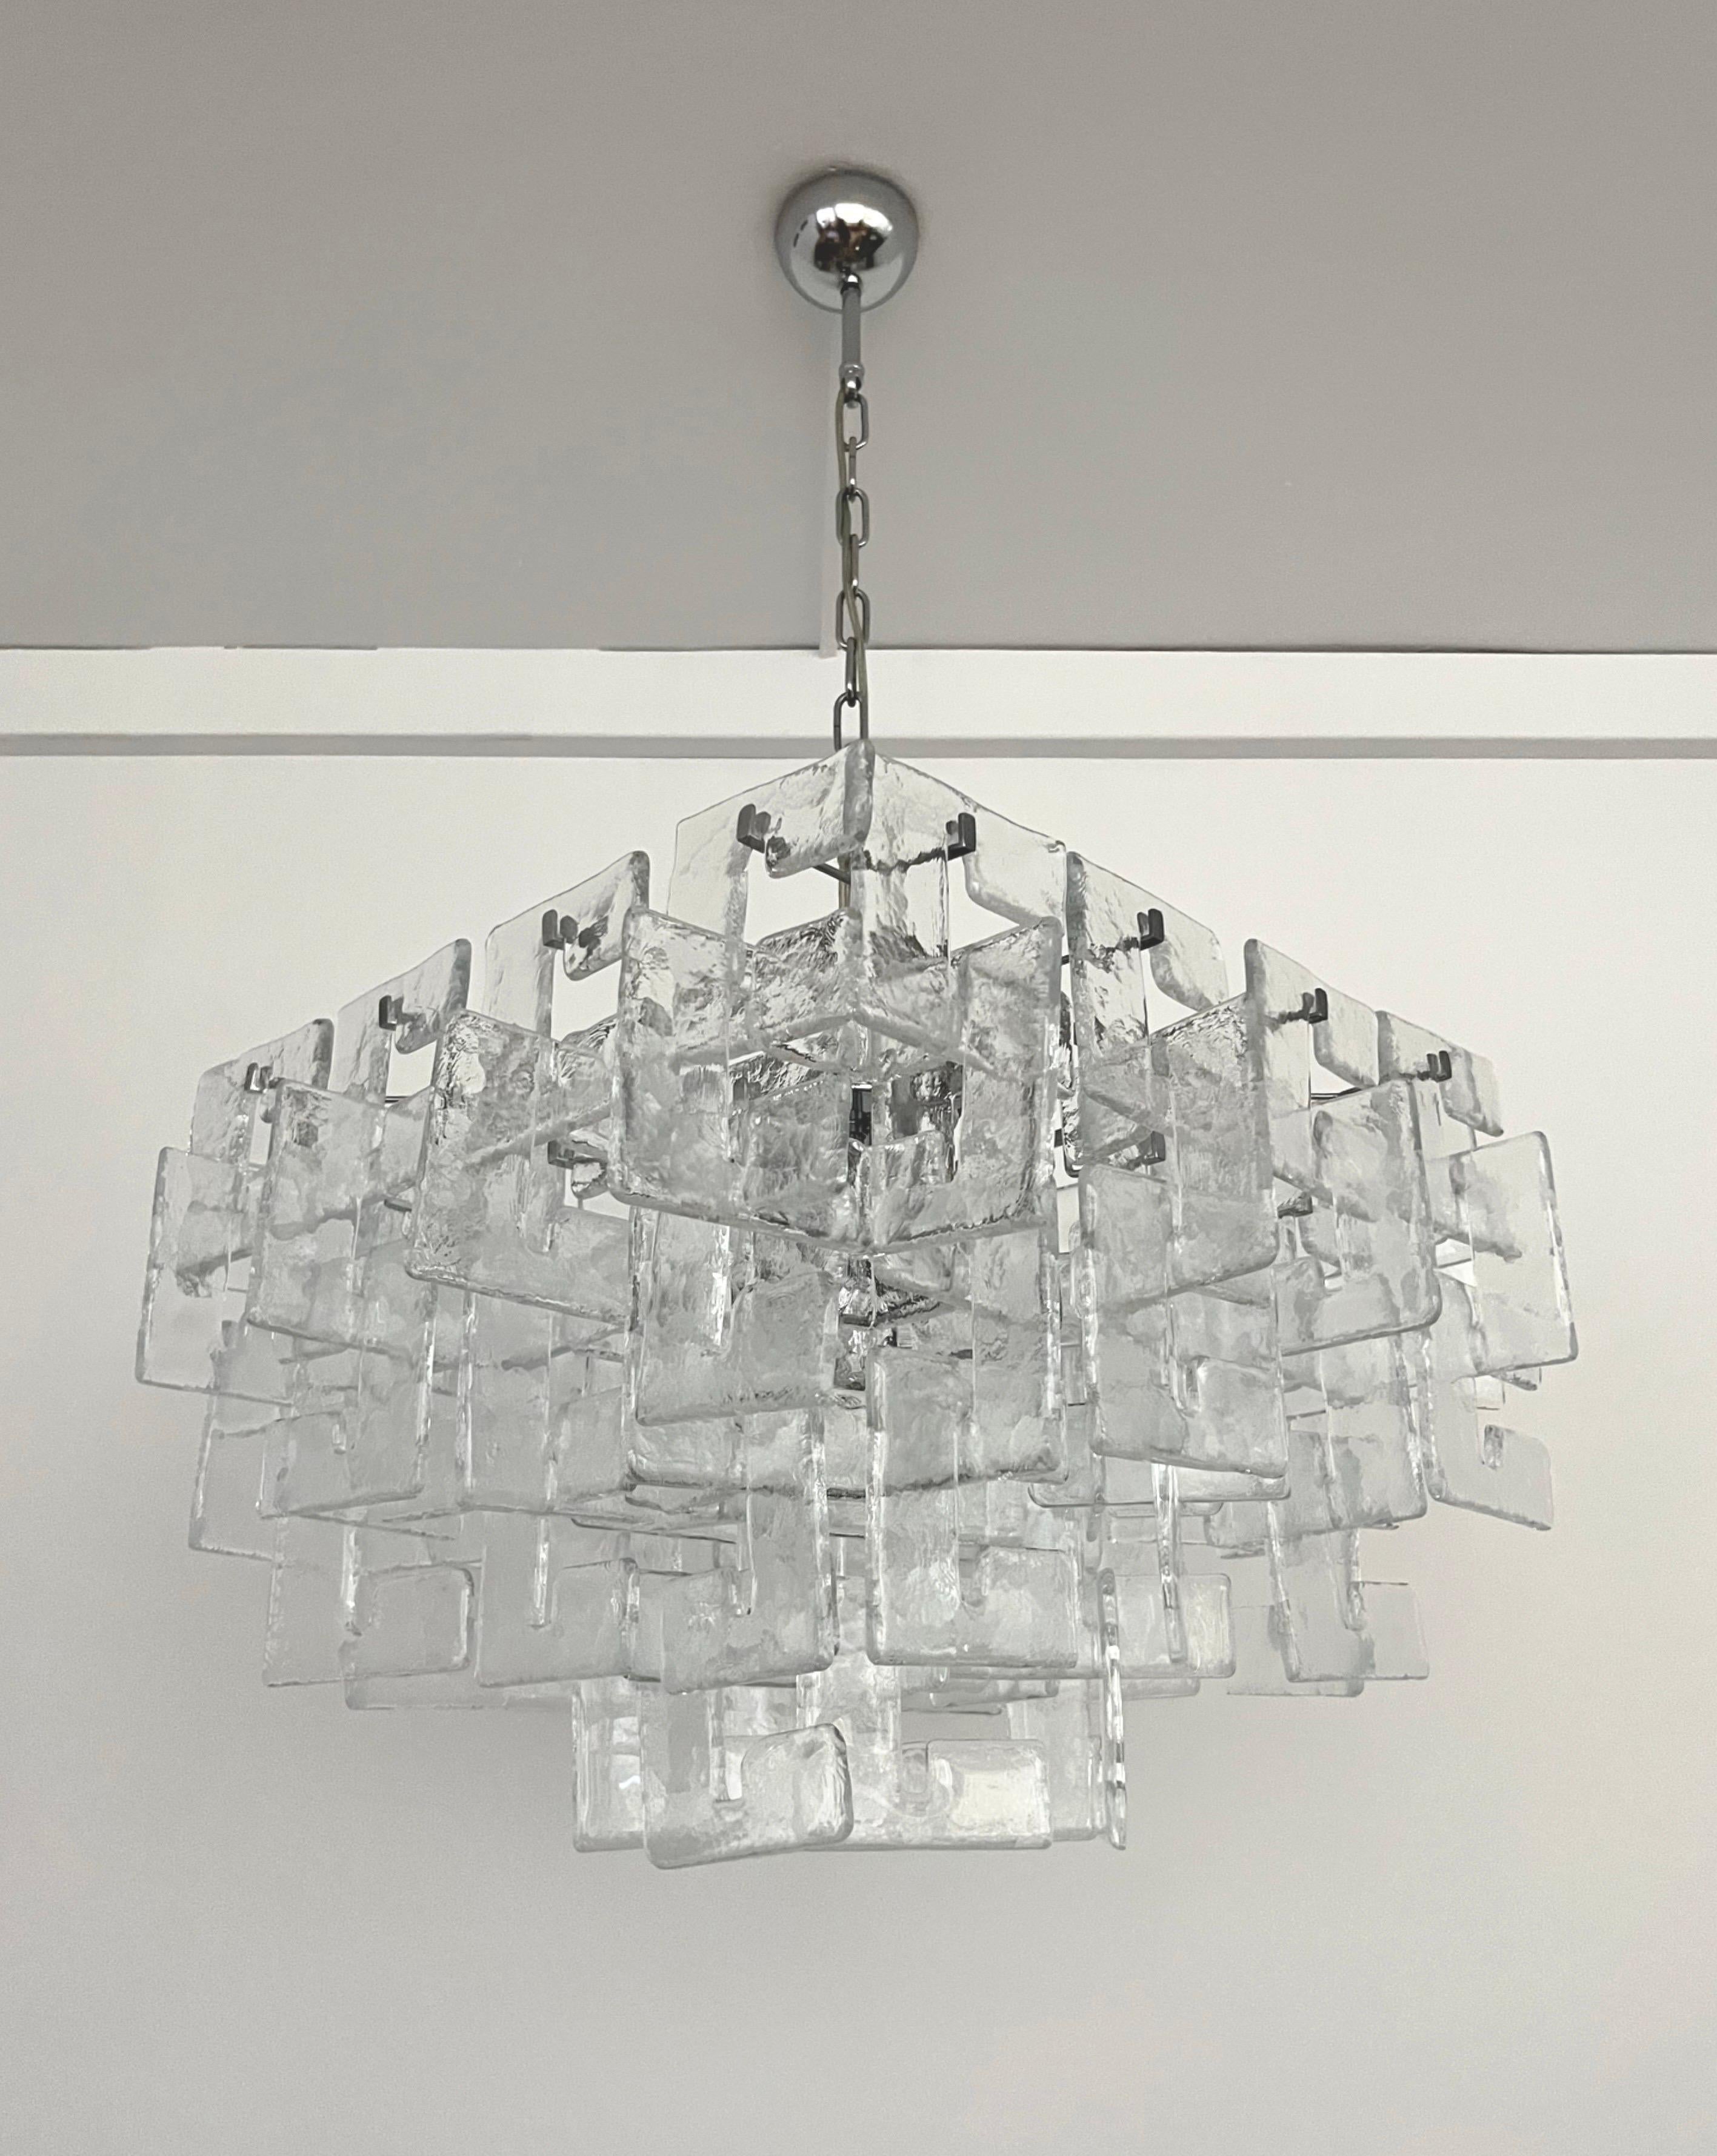 Beauty and stunning Interlocking Murano glass Chandelier by Carlo Nason for Mazzega. This Chandelier was made during the 1970s in Italy. 
Mazzega lie in the noble Venetian glassworking tradition; the firm was founded Angelo Vittorio Mazzega in